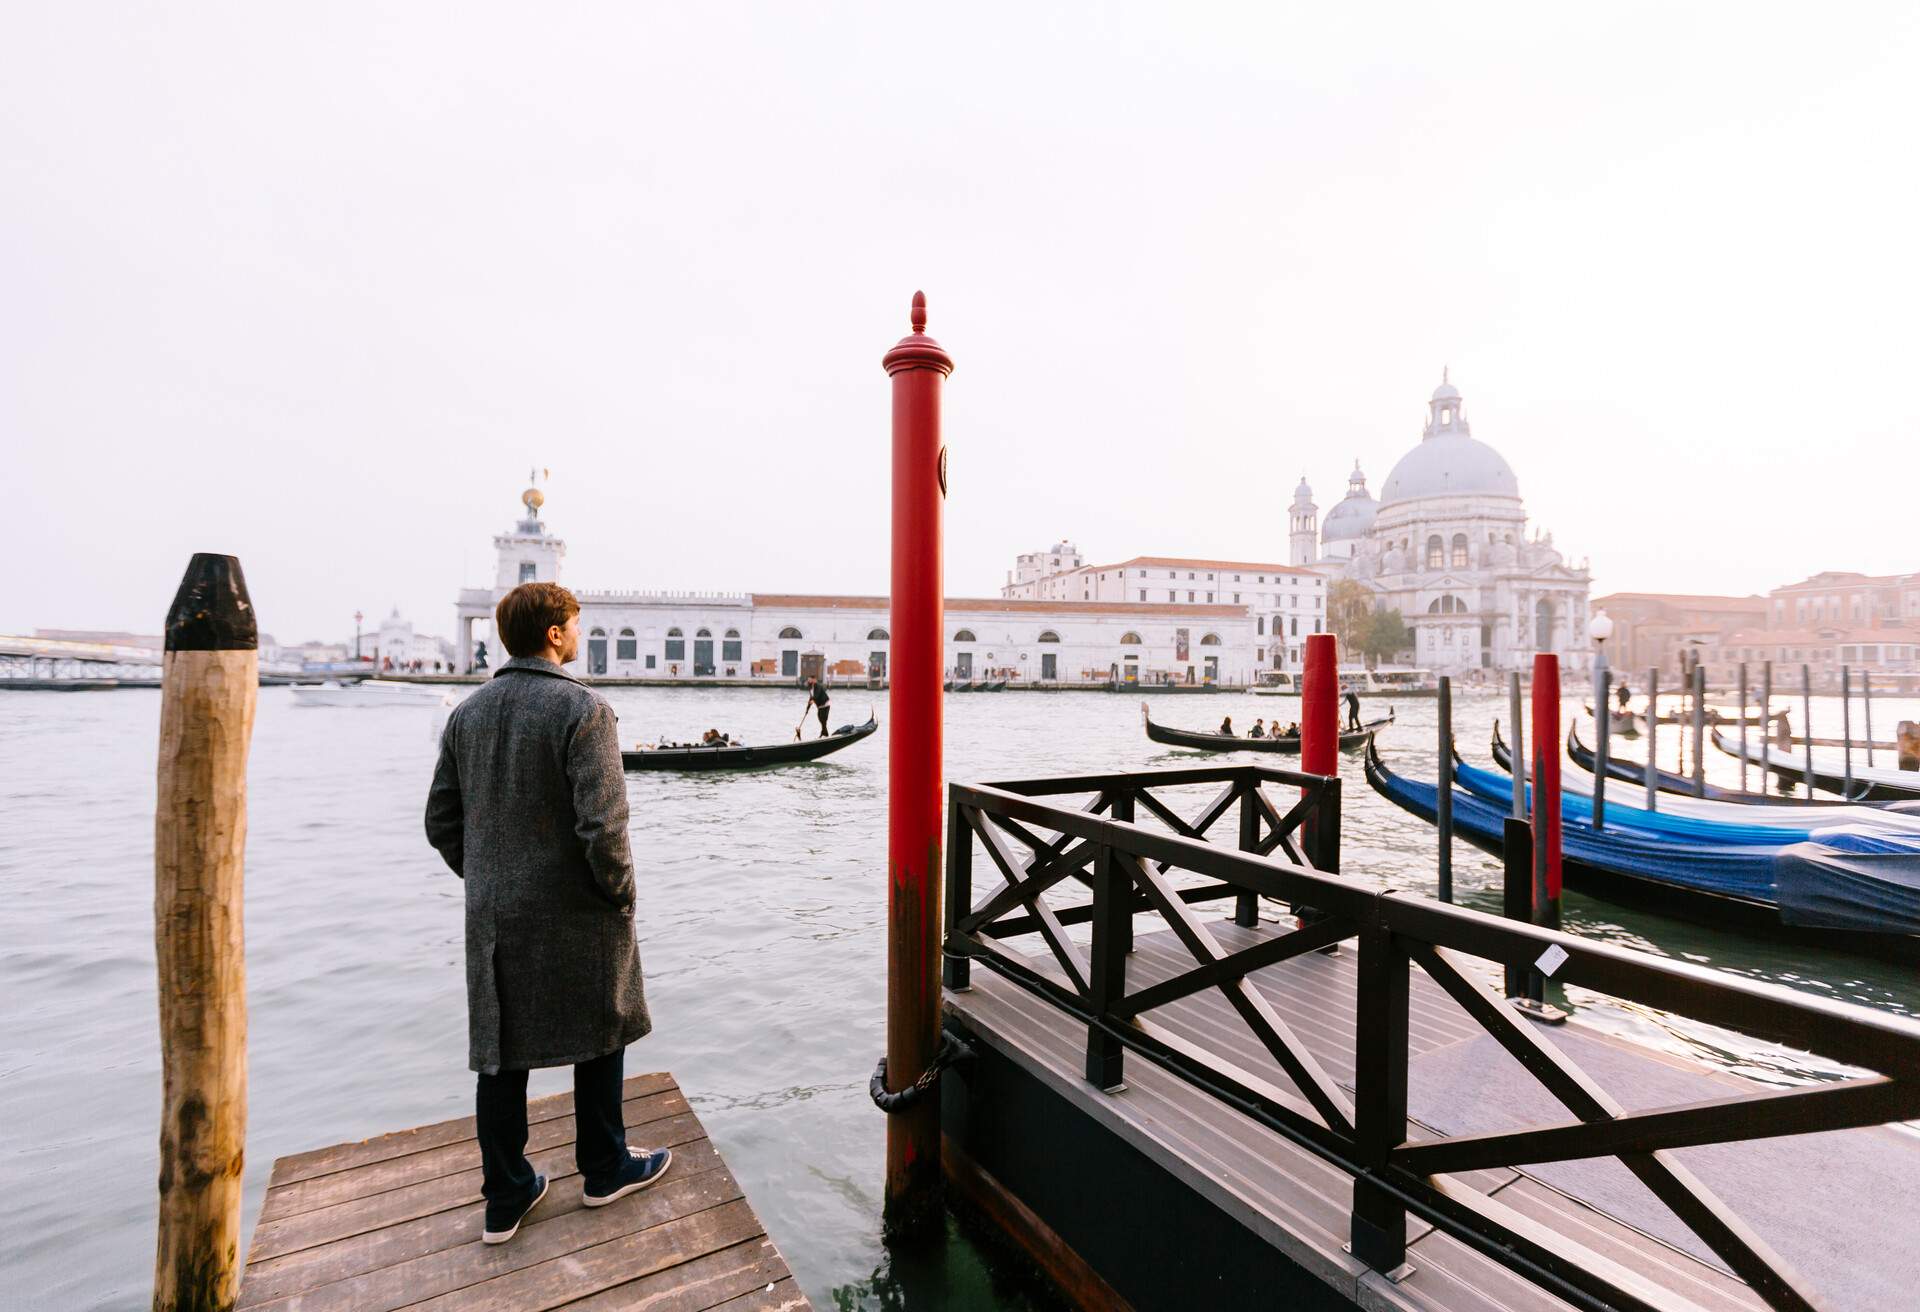 A person donning a long coat stands pensively on the pier, gazing intently at a majestic white building adorned with a grand dome across the shimmering waters.